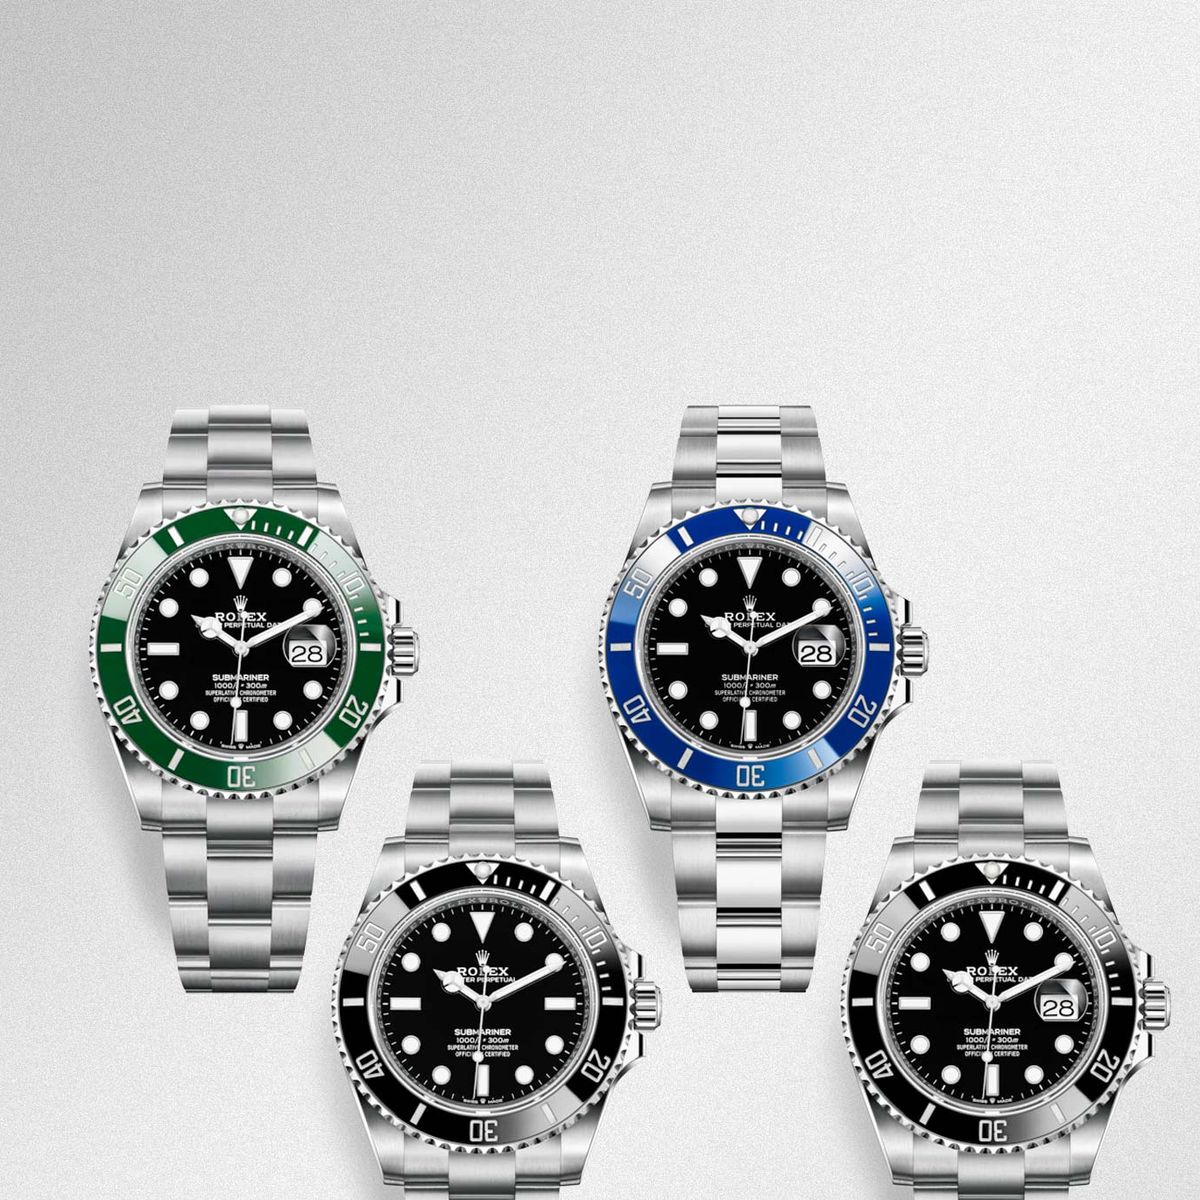 Which Submariner is better fit on a thin wrist? 40mm or 41mm